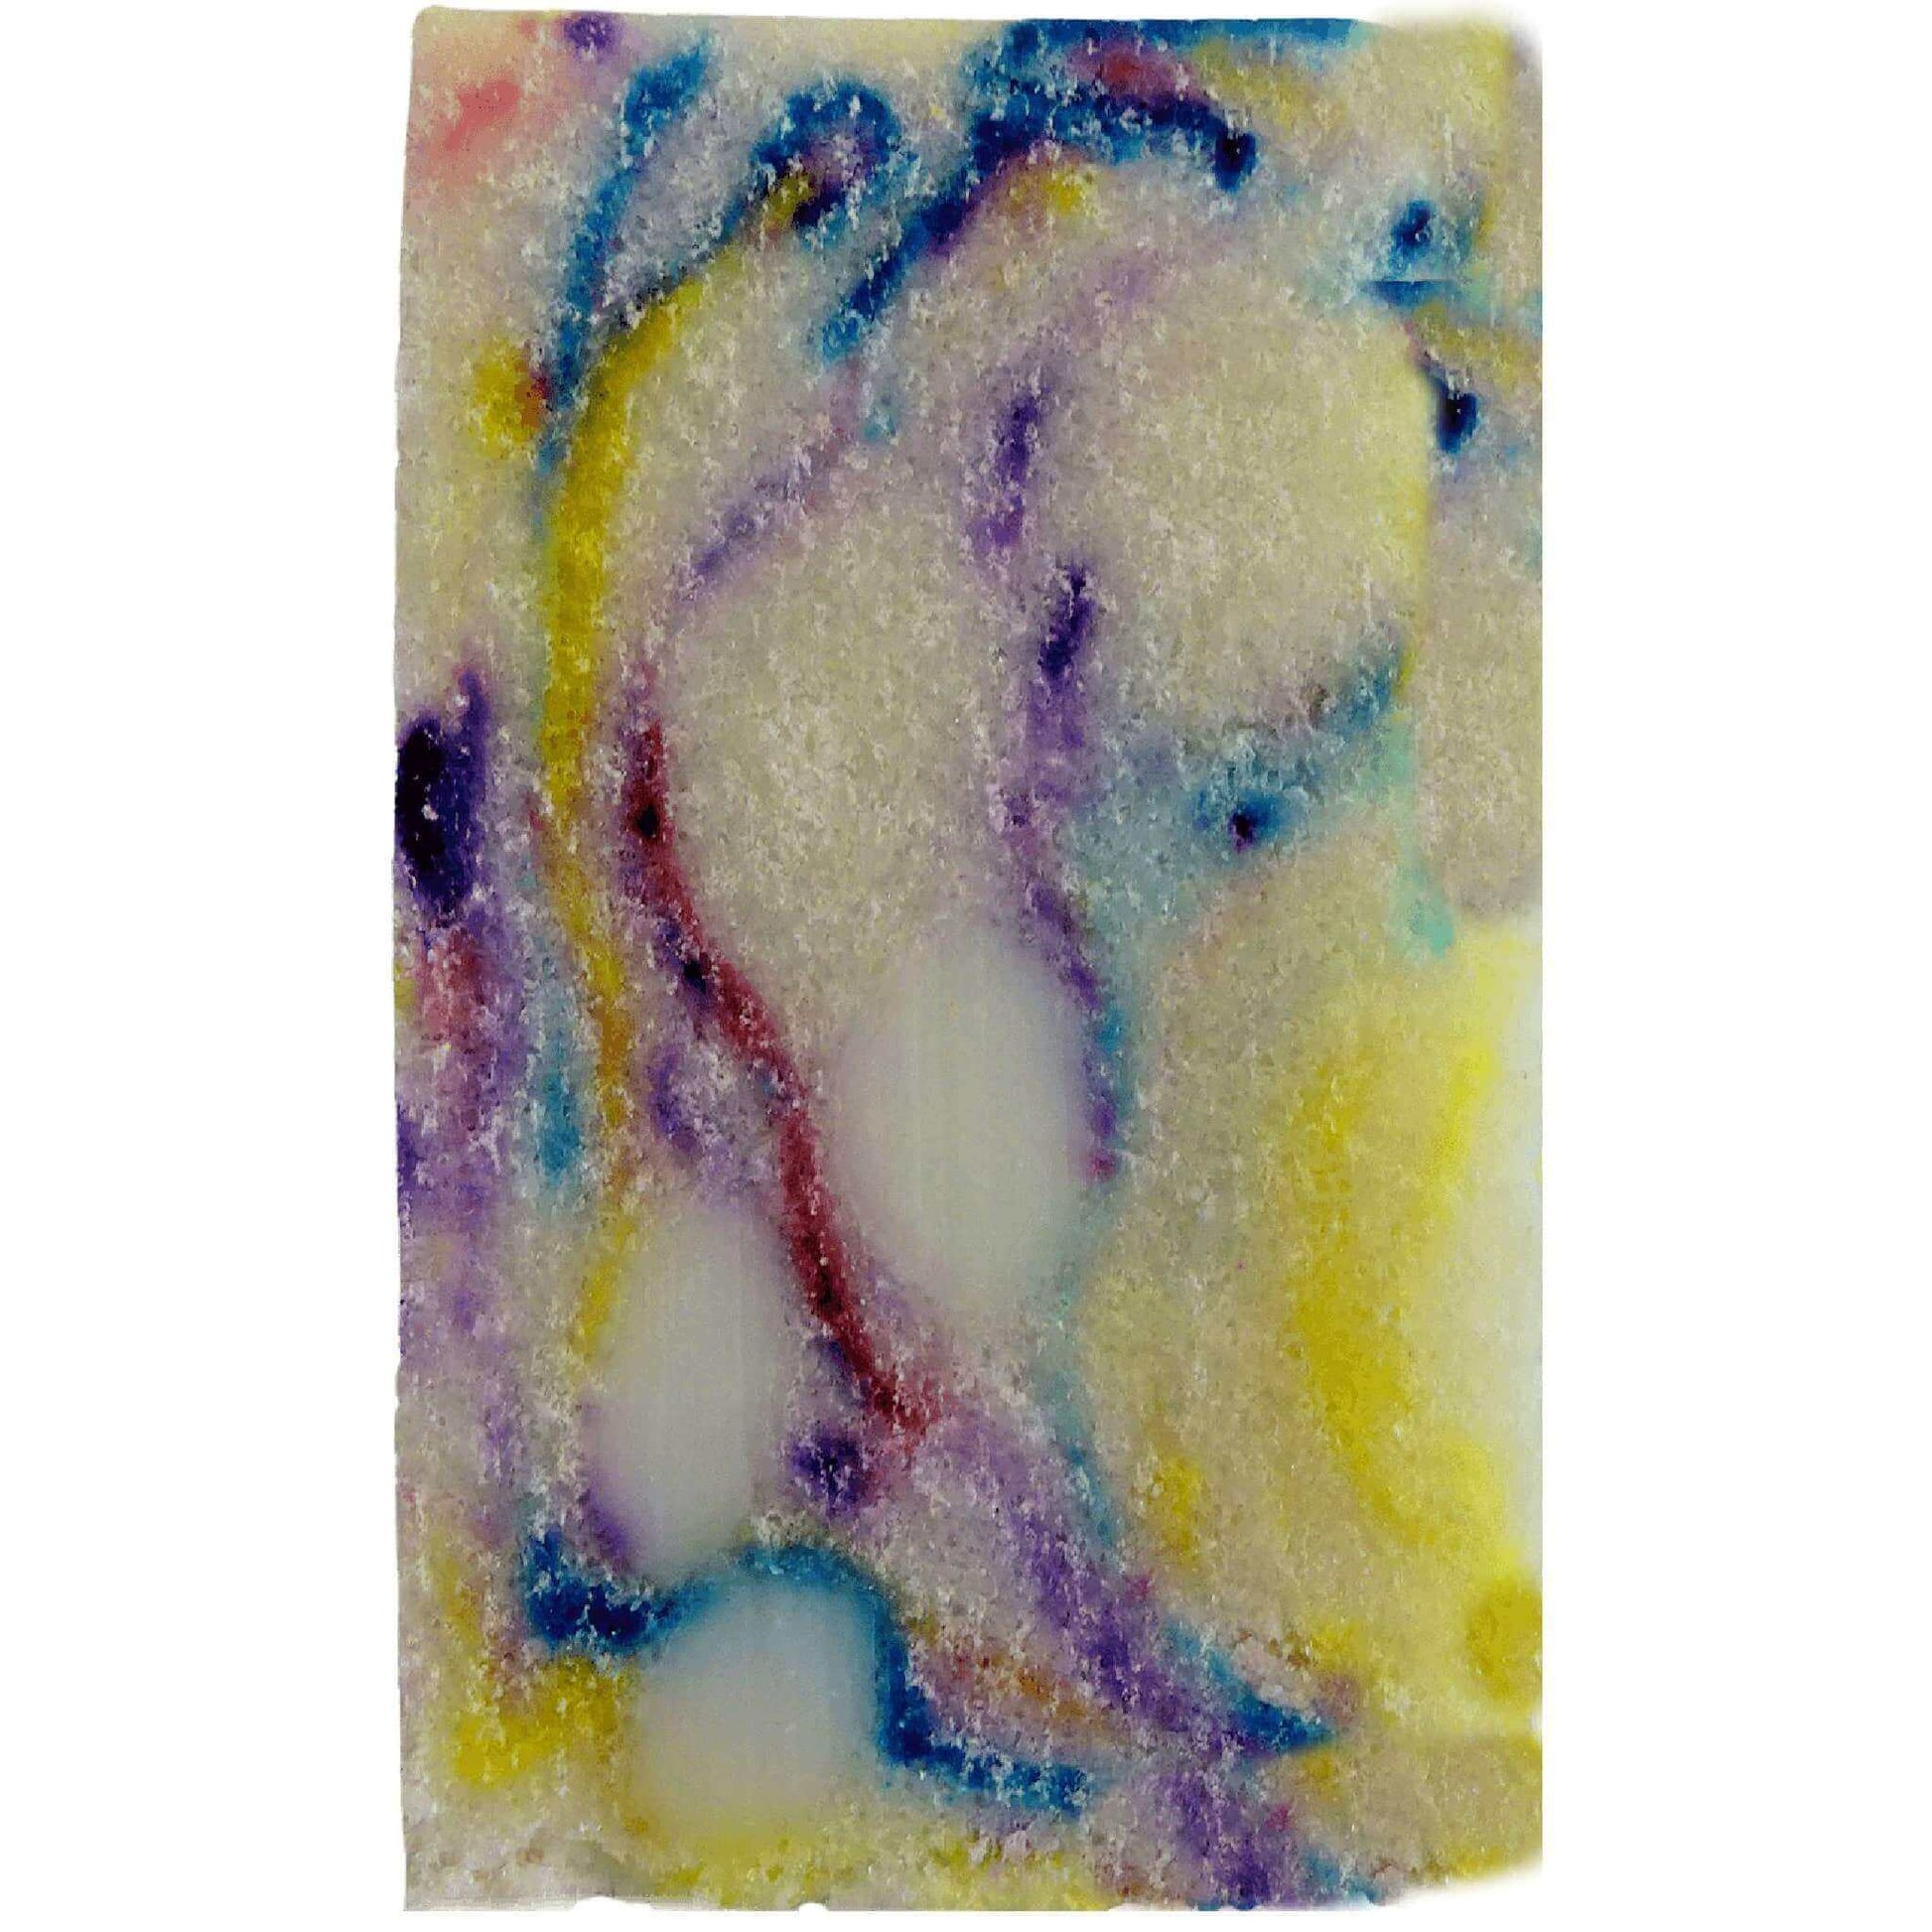 Unicorn Dreams Sugar Scrub Shower Bar is your ticket to a magical bath experience. Nourish your skin while dreaming of unicorns!